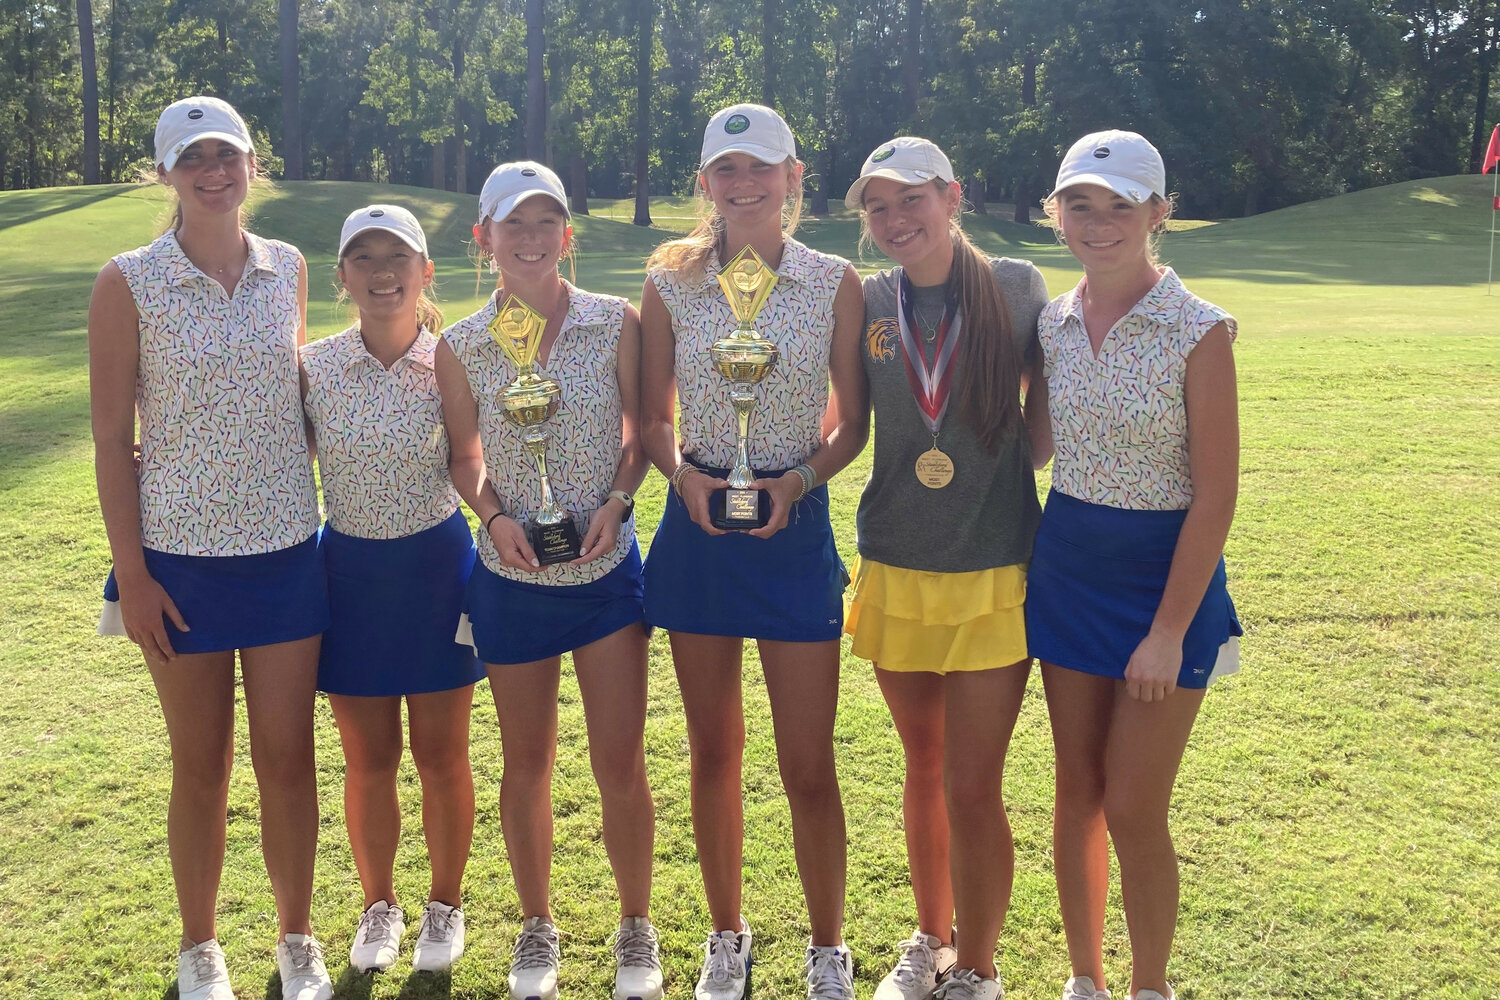 The Lexington High School girls golf team is currently ranked fourth in 5A. Pictured from left to right: Lillie Howell, Claire Kim, Karys Clampitt, Taryn Smoak, Brooke Burgess, and Adysen Langdale